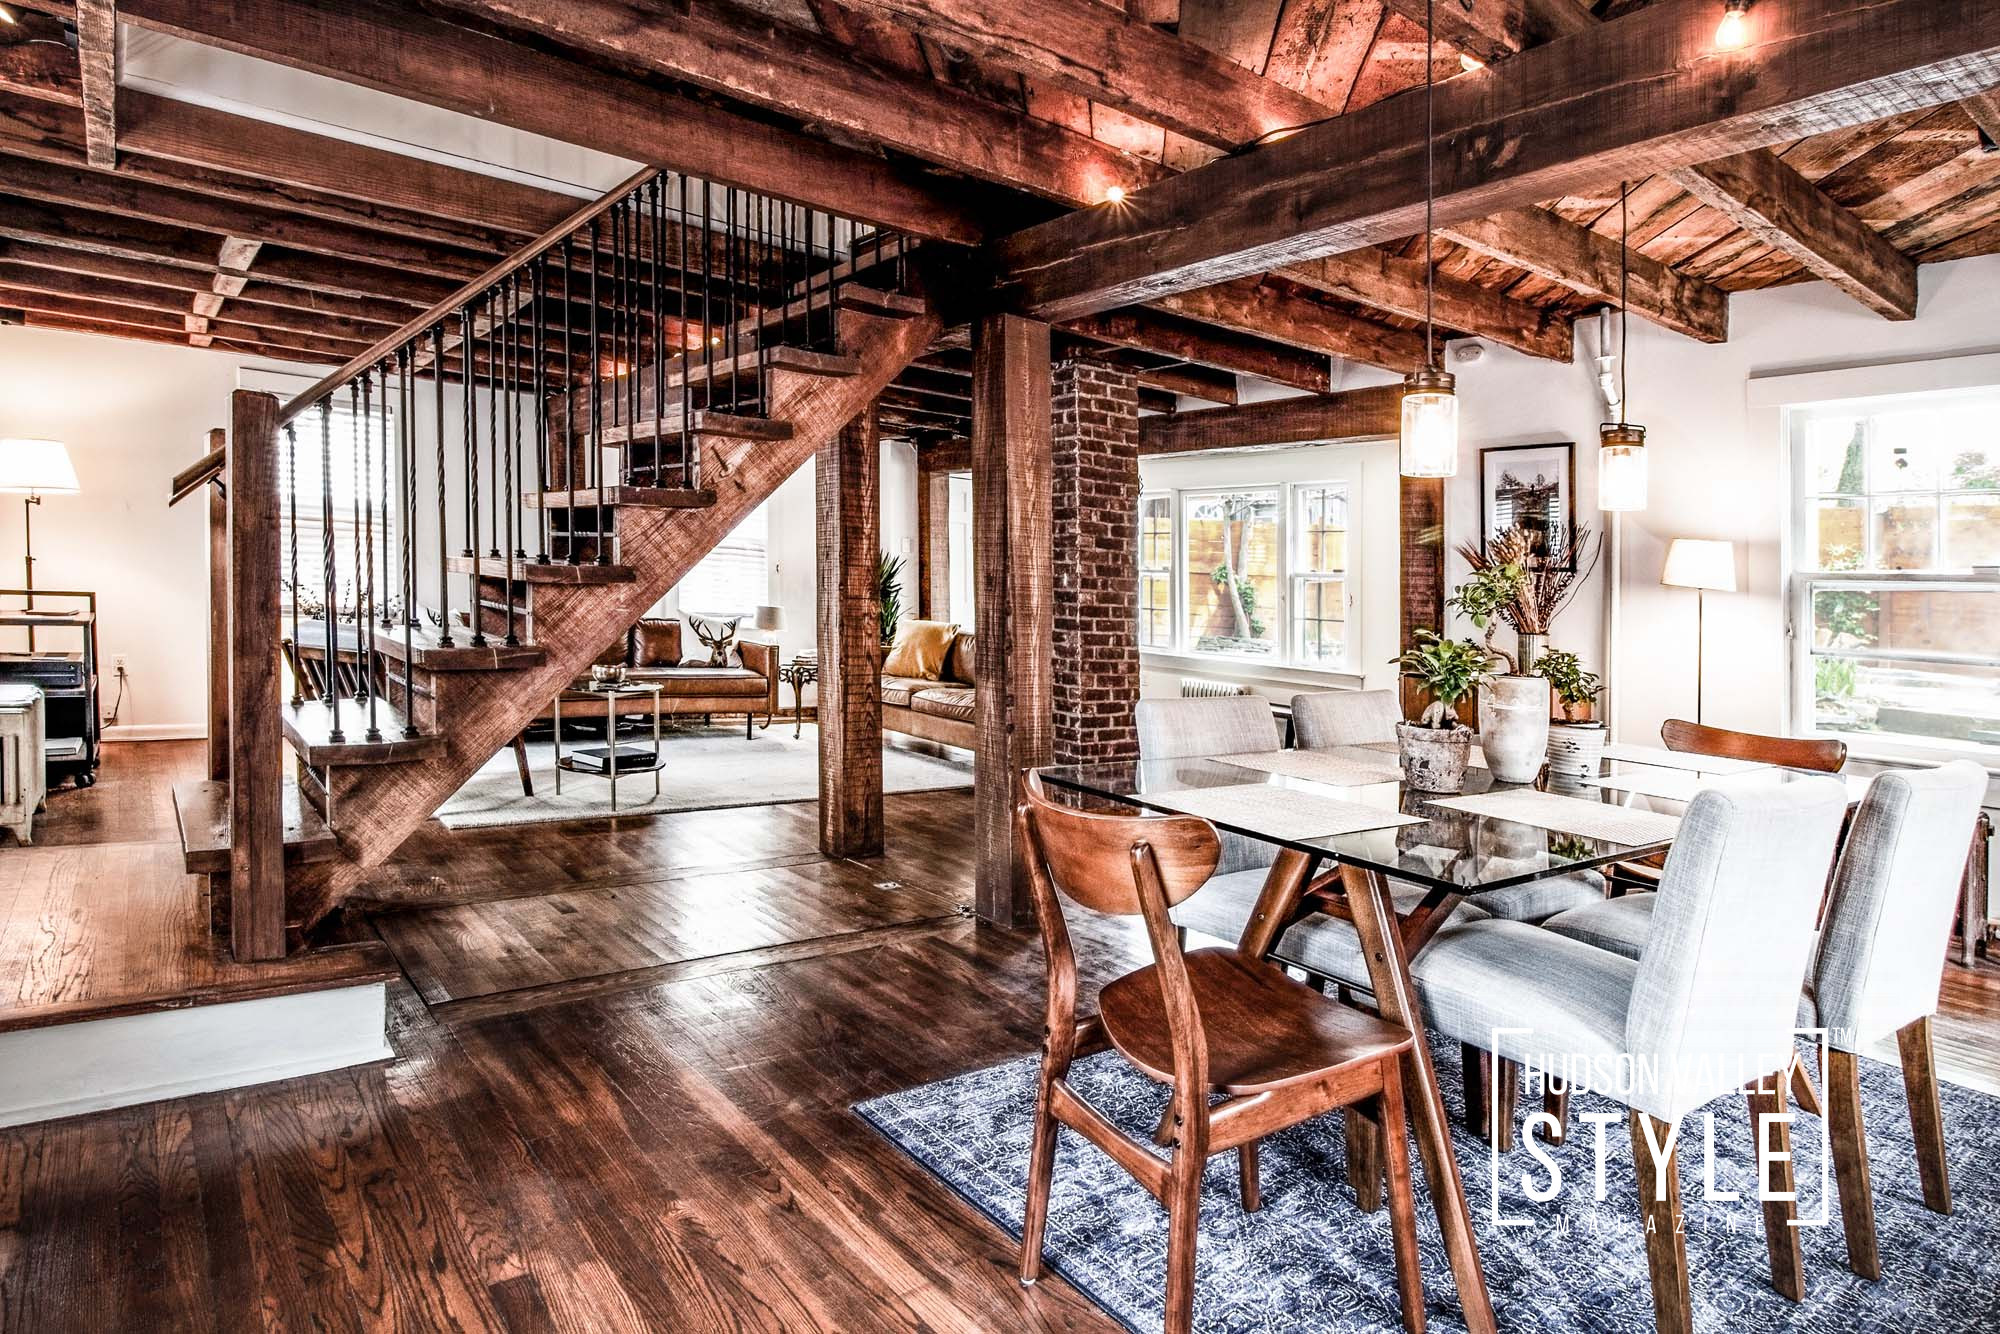 Modern Rustic Cottage in Woodstock, NY that Will Make You Feel at Home – Hudson Valley Airbnb © 2022 MAXWELL ALEXANDER